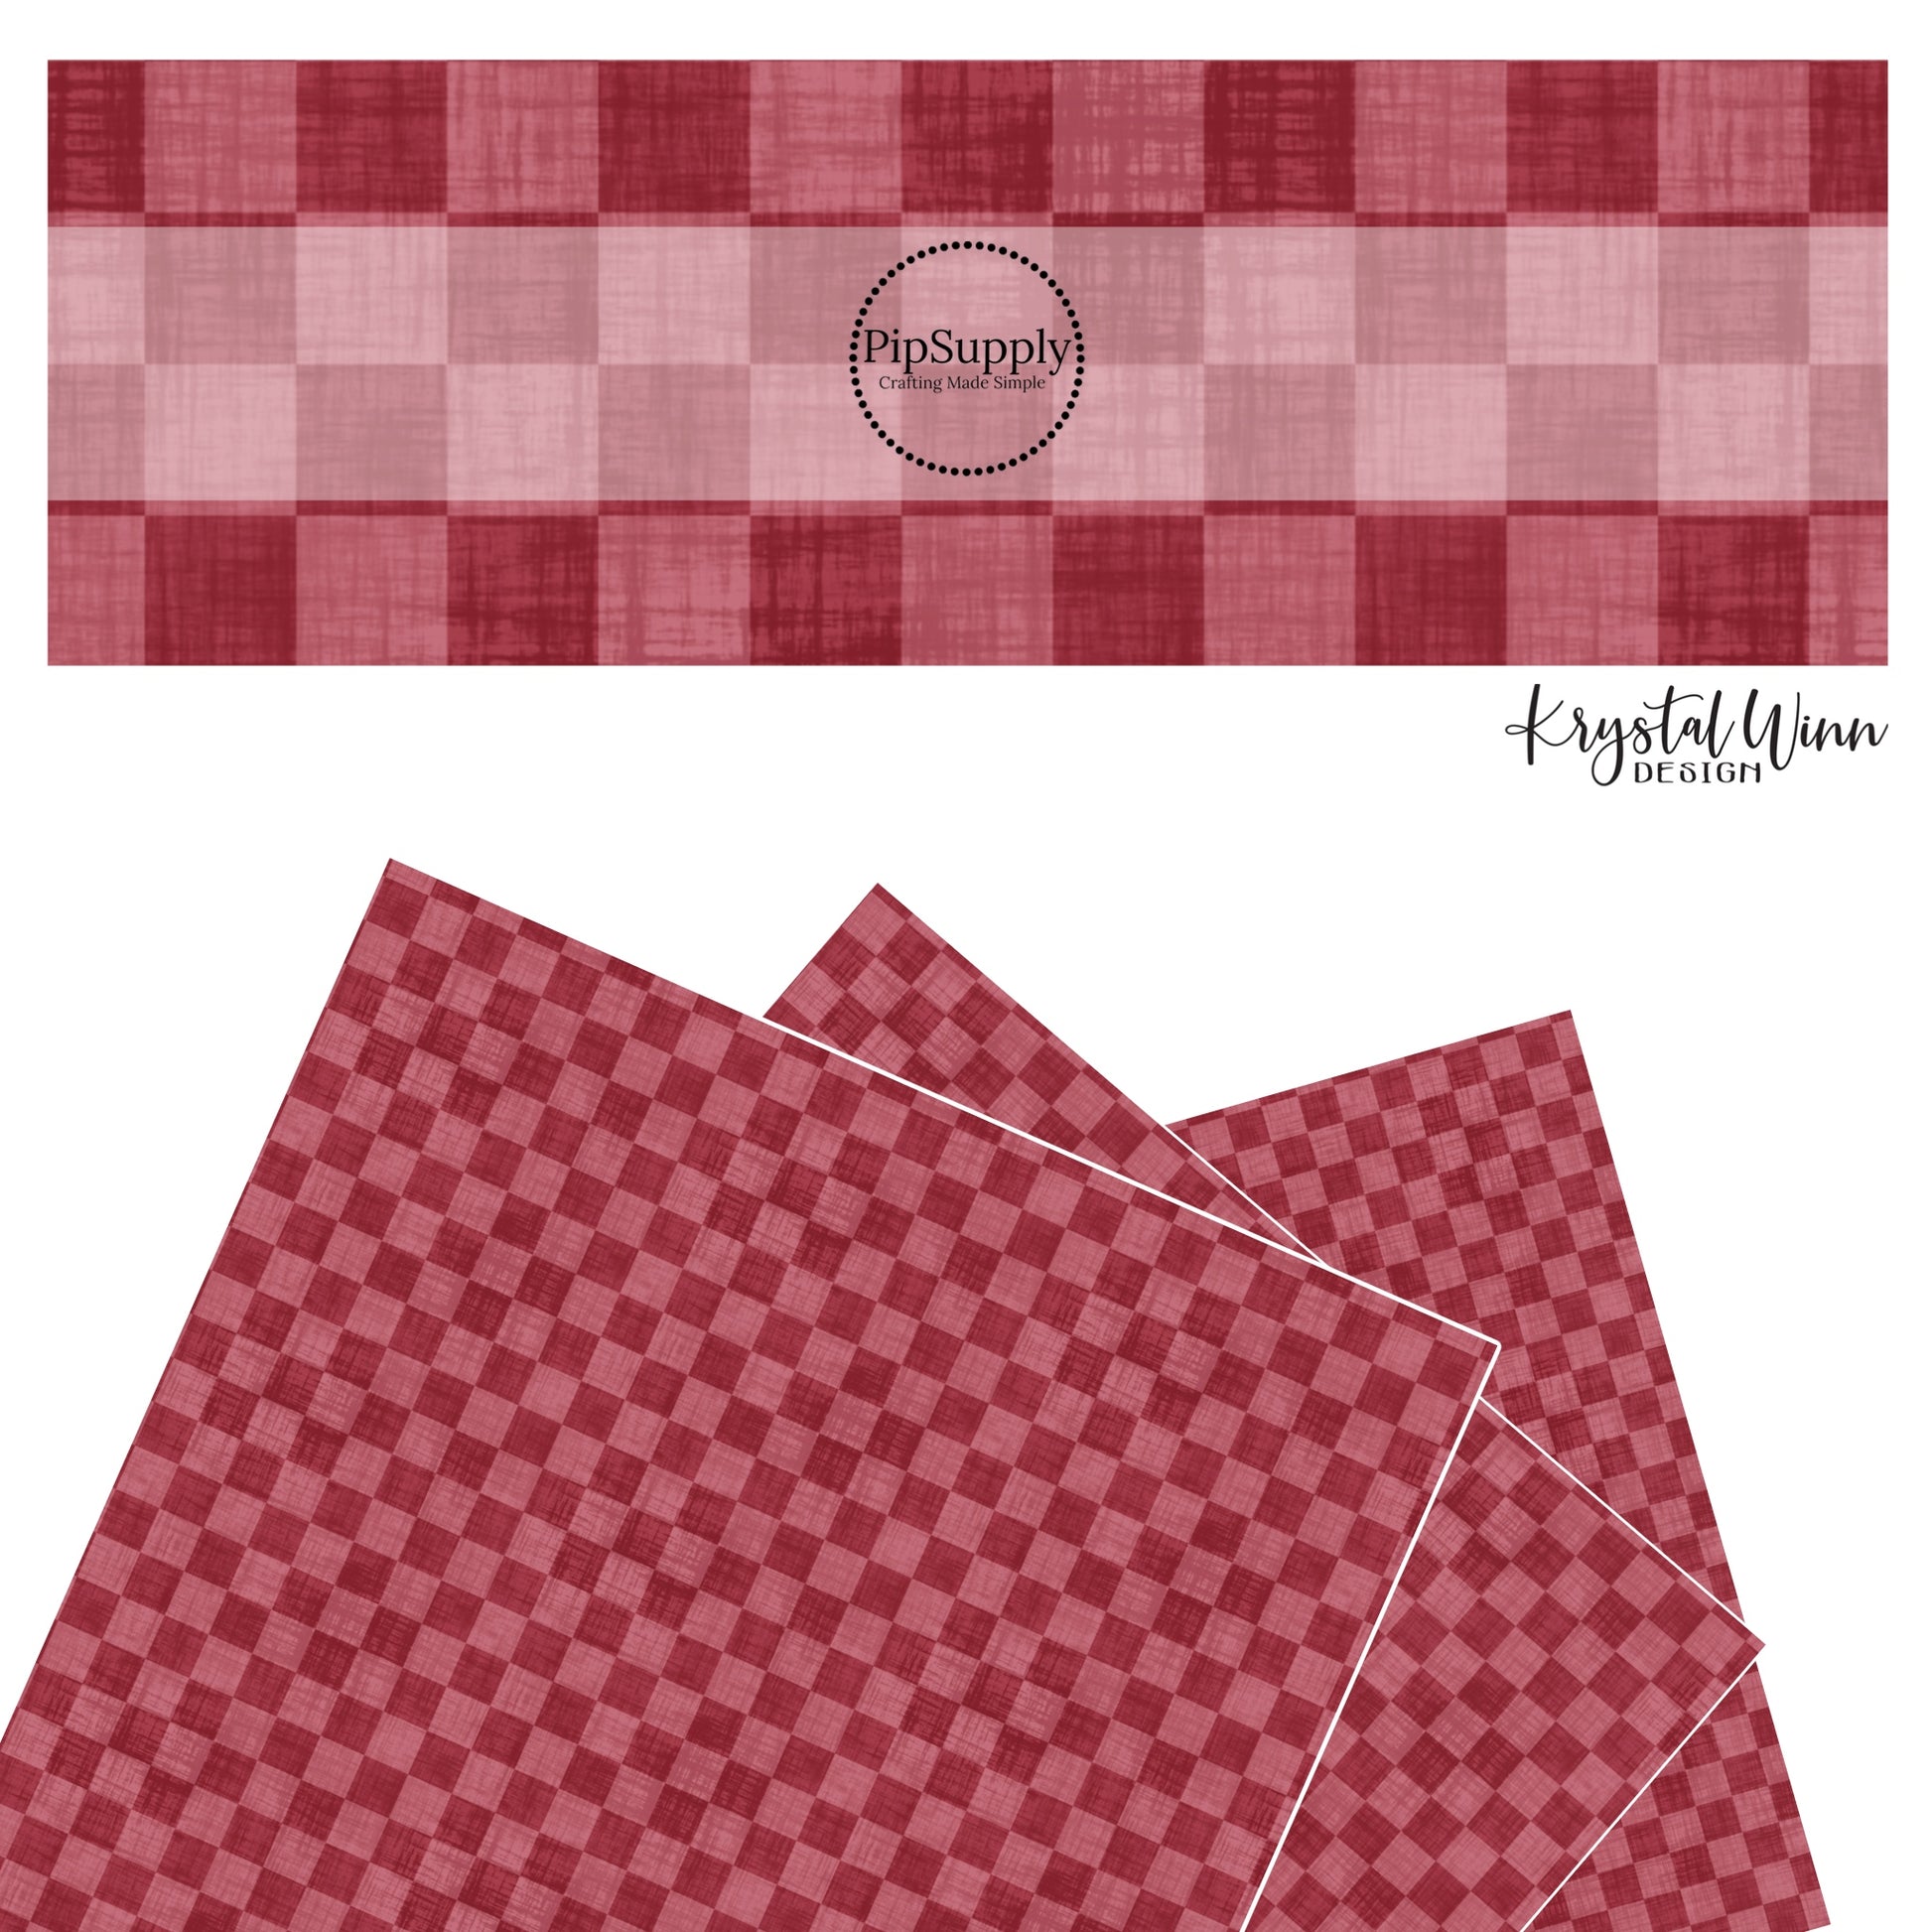 Distressed multi red checkered faux leather sheets